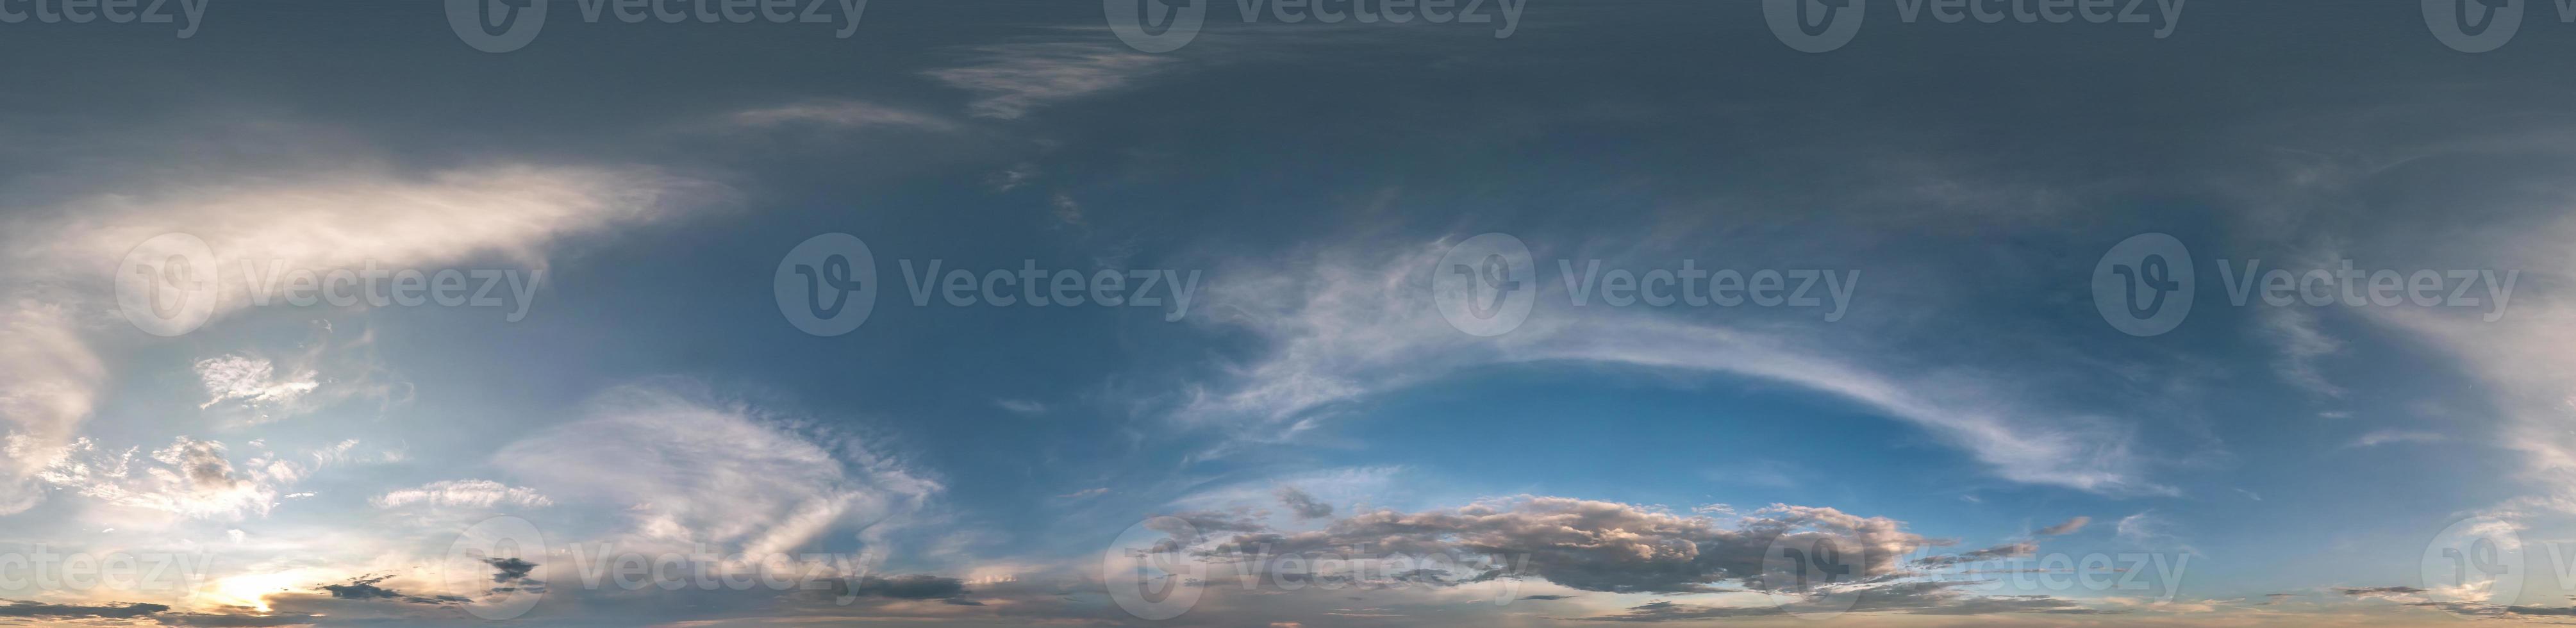 Seamless cloudy blue sky hdri panorama 360 degrees angle view with zenith and beautiful clouds for use in 3d graphics as sky dome photo